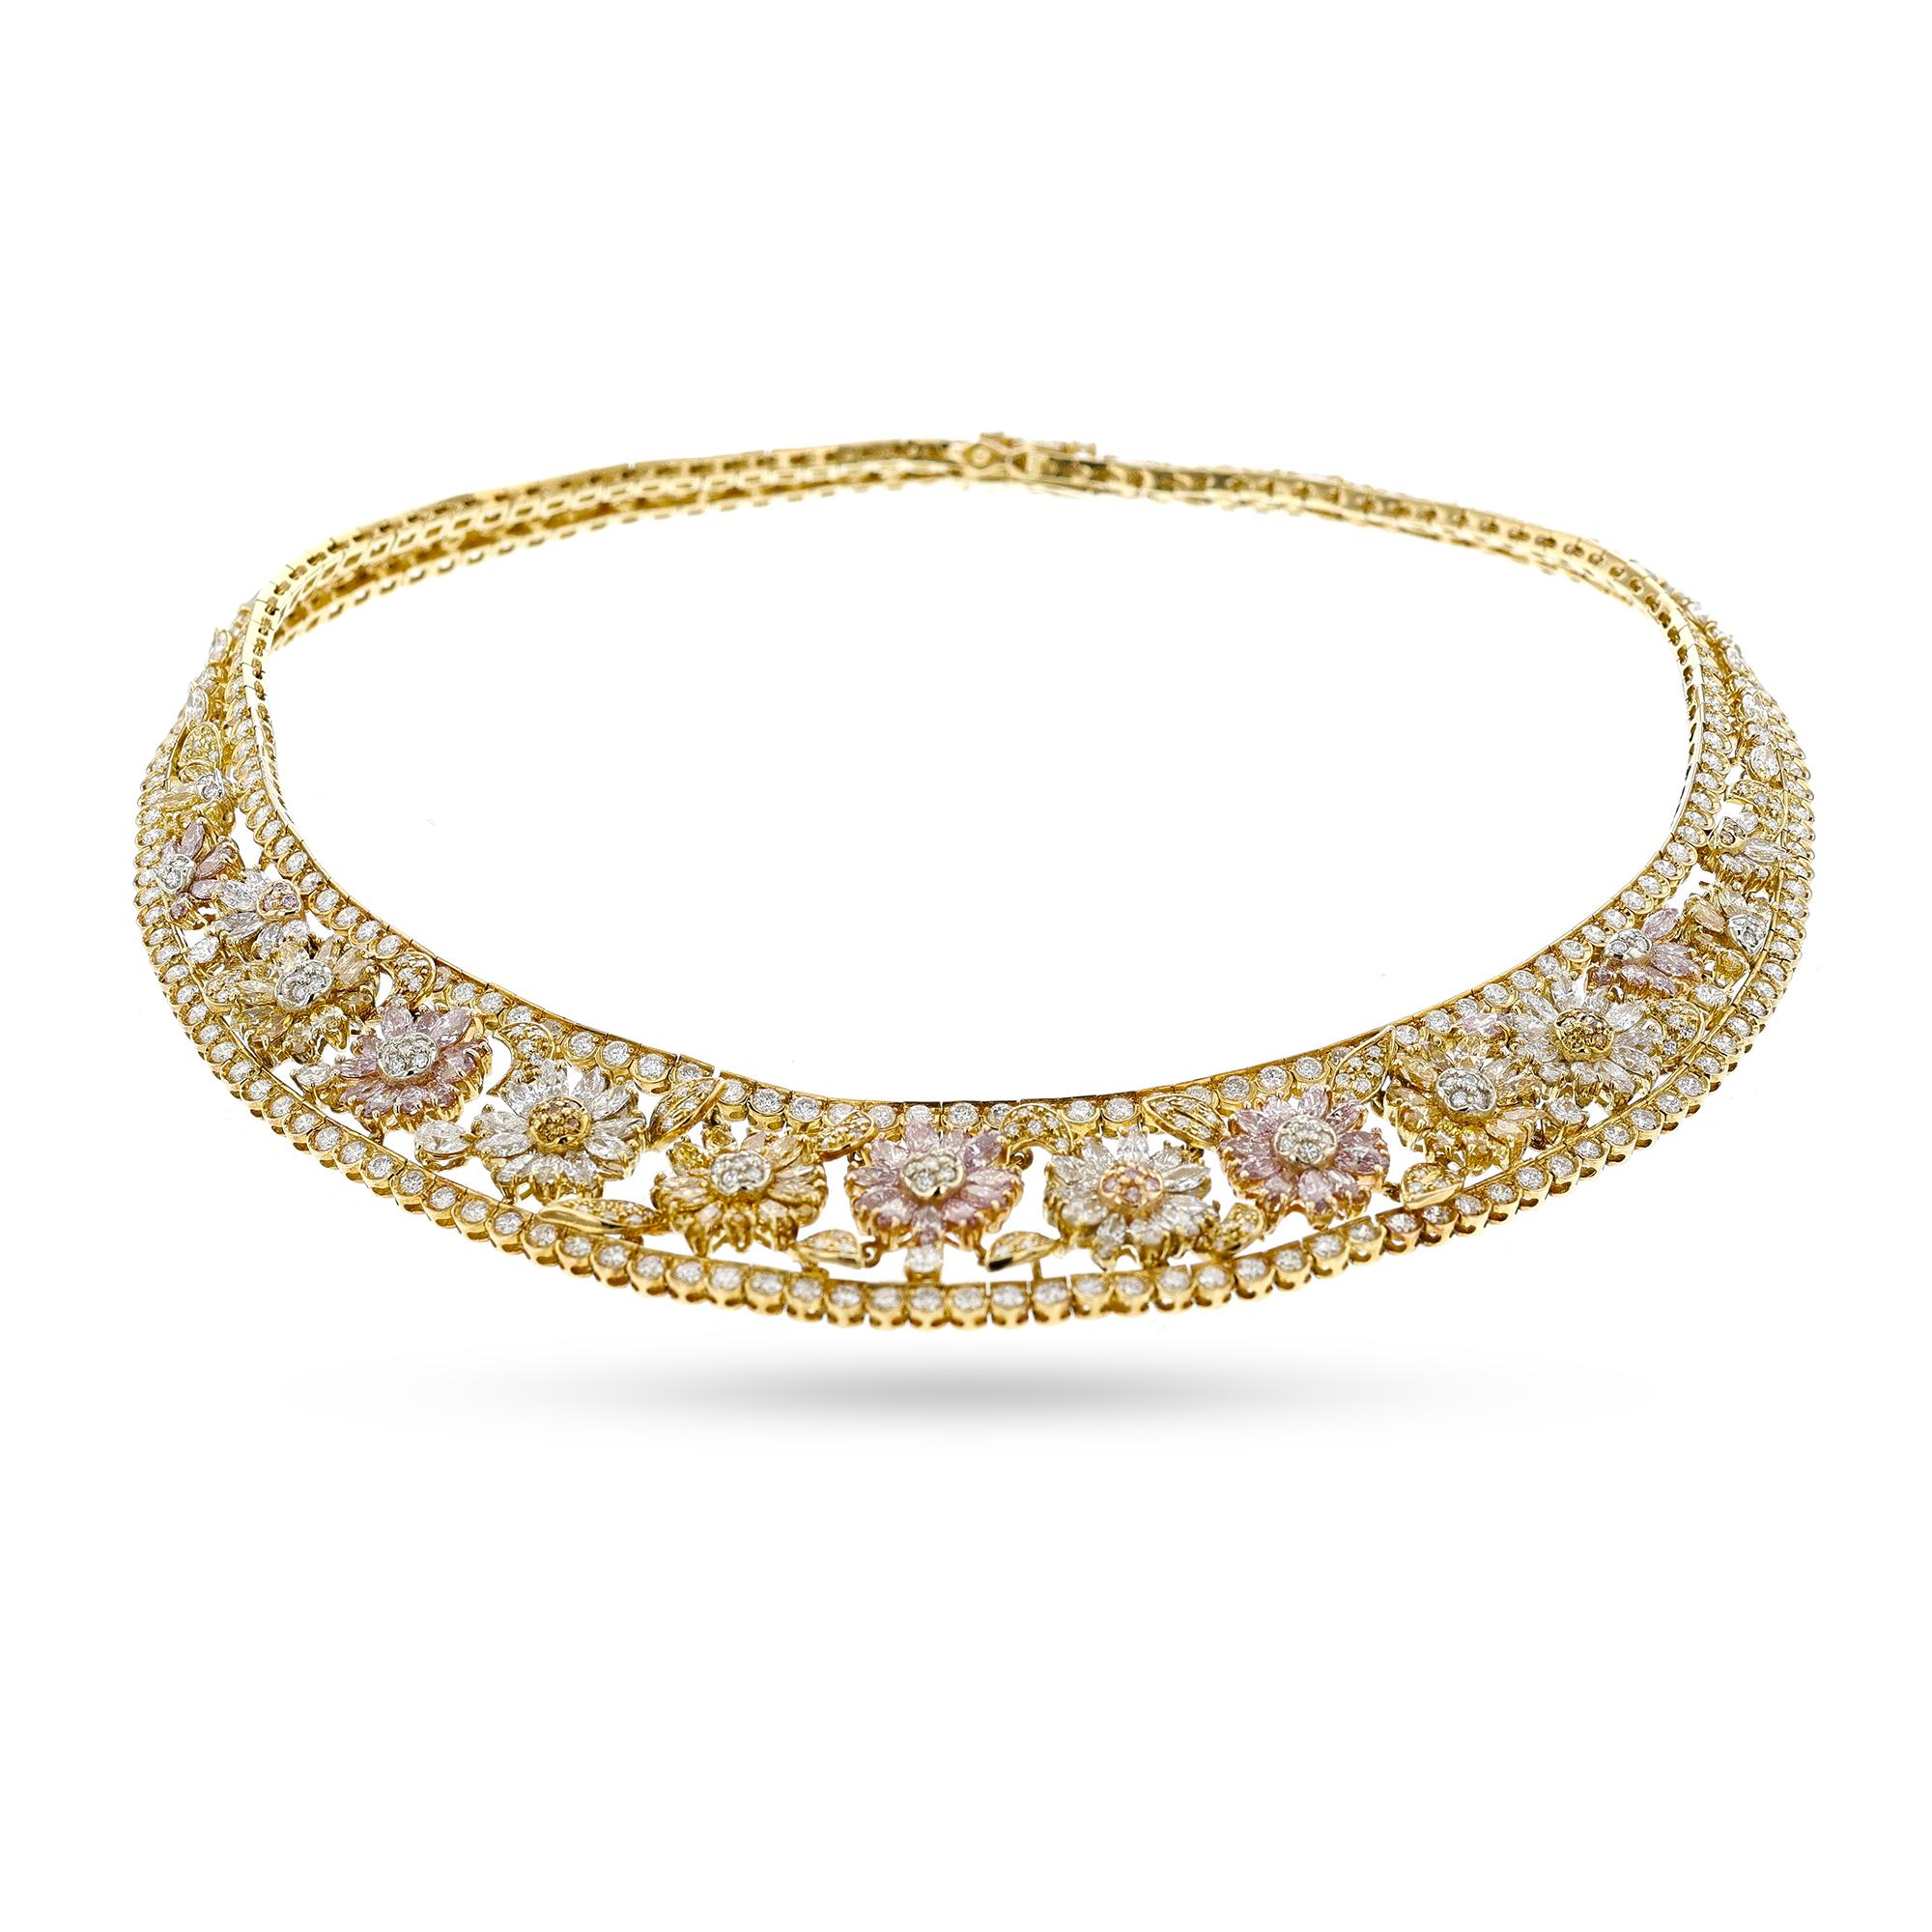 This beautiful and exquisite necklace is designed with a floral pattern set with natural fancy-color round and pear-shaped GIA-certified* pink, yellow, and white diamonds that are set in 18k yellow gold. The floral design is further encased in a row